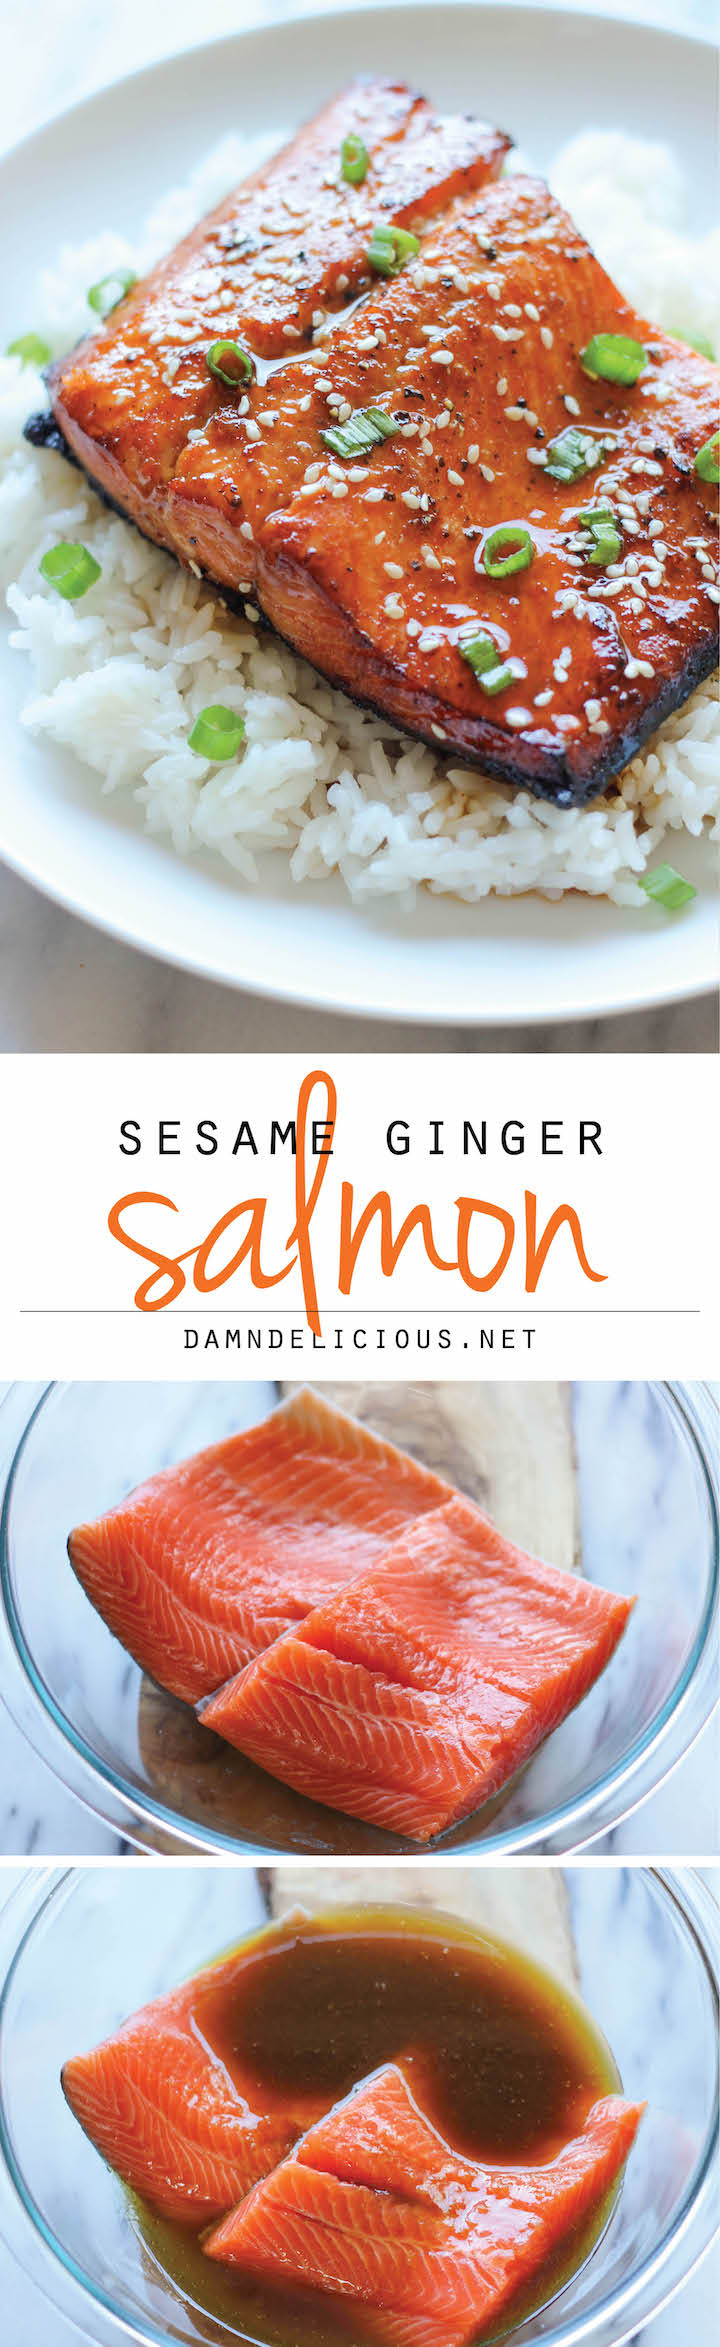 Sesame Ginger Salmon - A super easy salmon dish bursting with so much flavor, and it's hearty-healthy too!